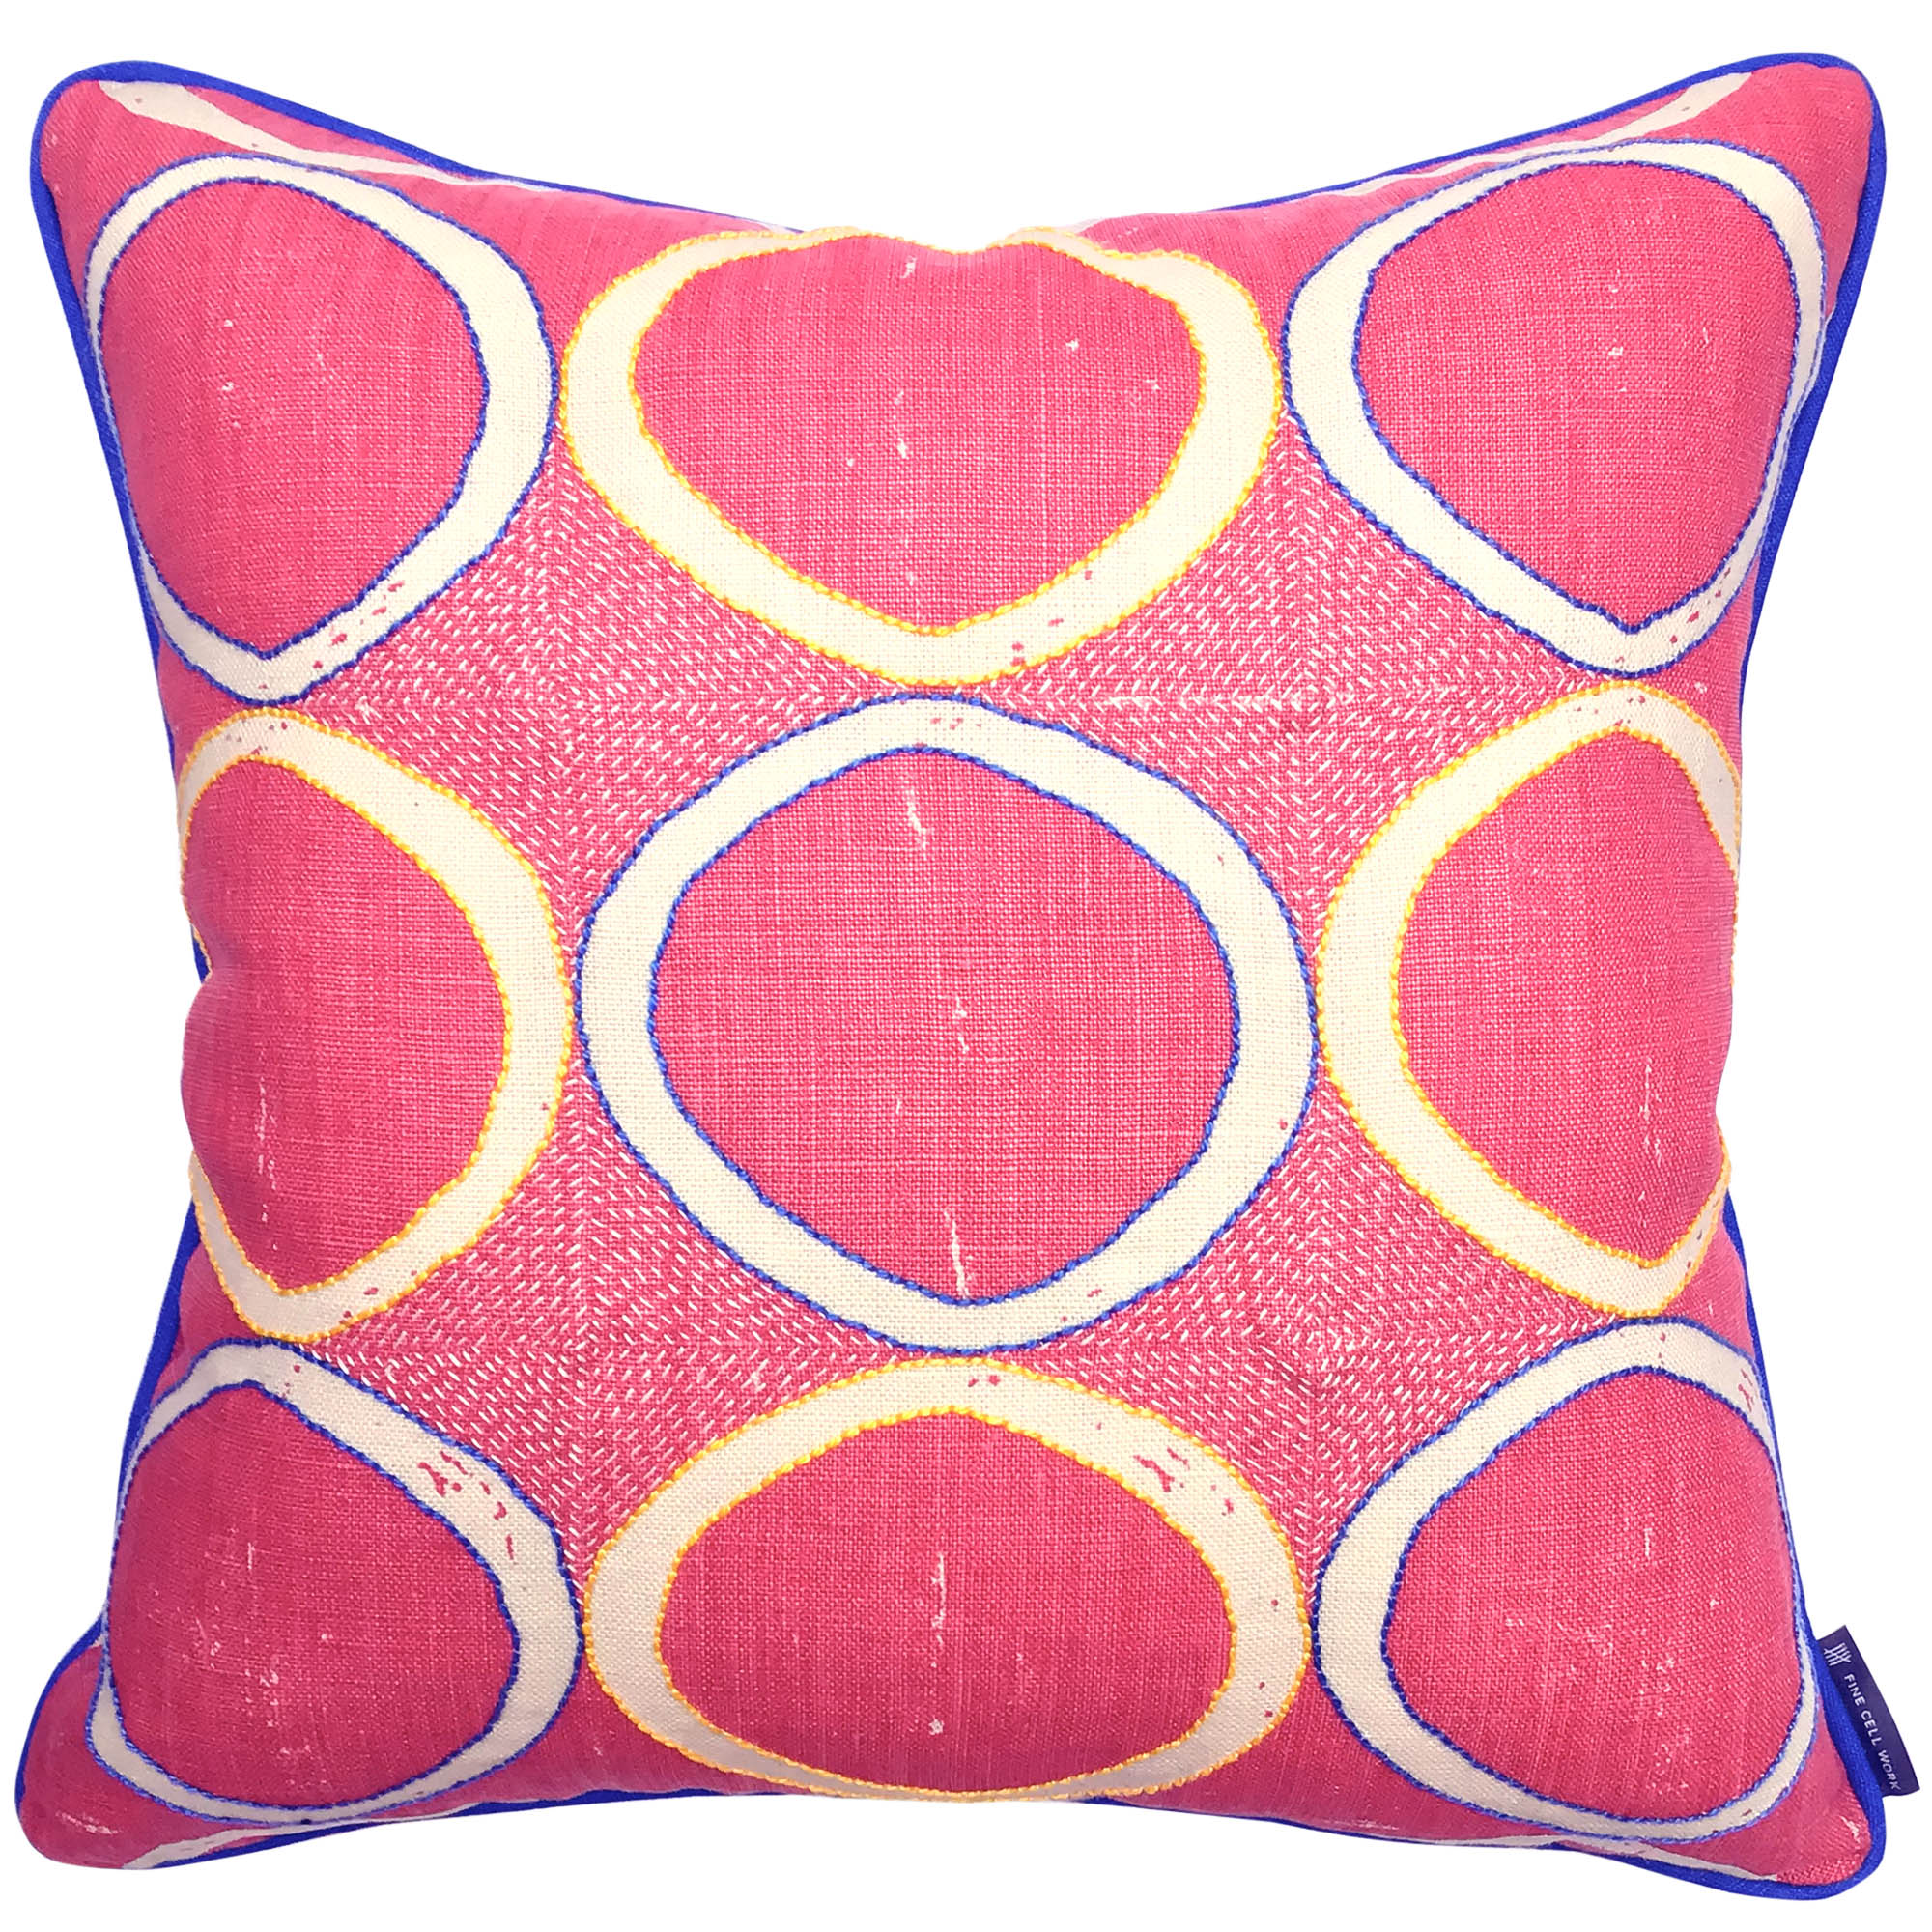 Fine-Cell-Work-Berry-Red-Circles-Blithfield-Kit-Kemp-Hand-Embroidered-New-Linen-Cushion.jpg